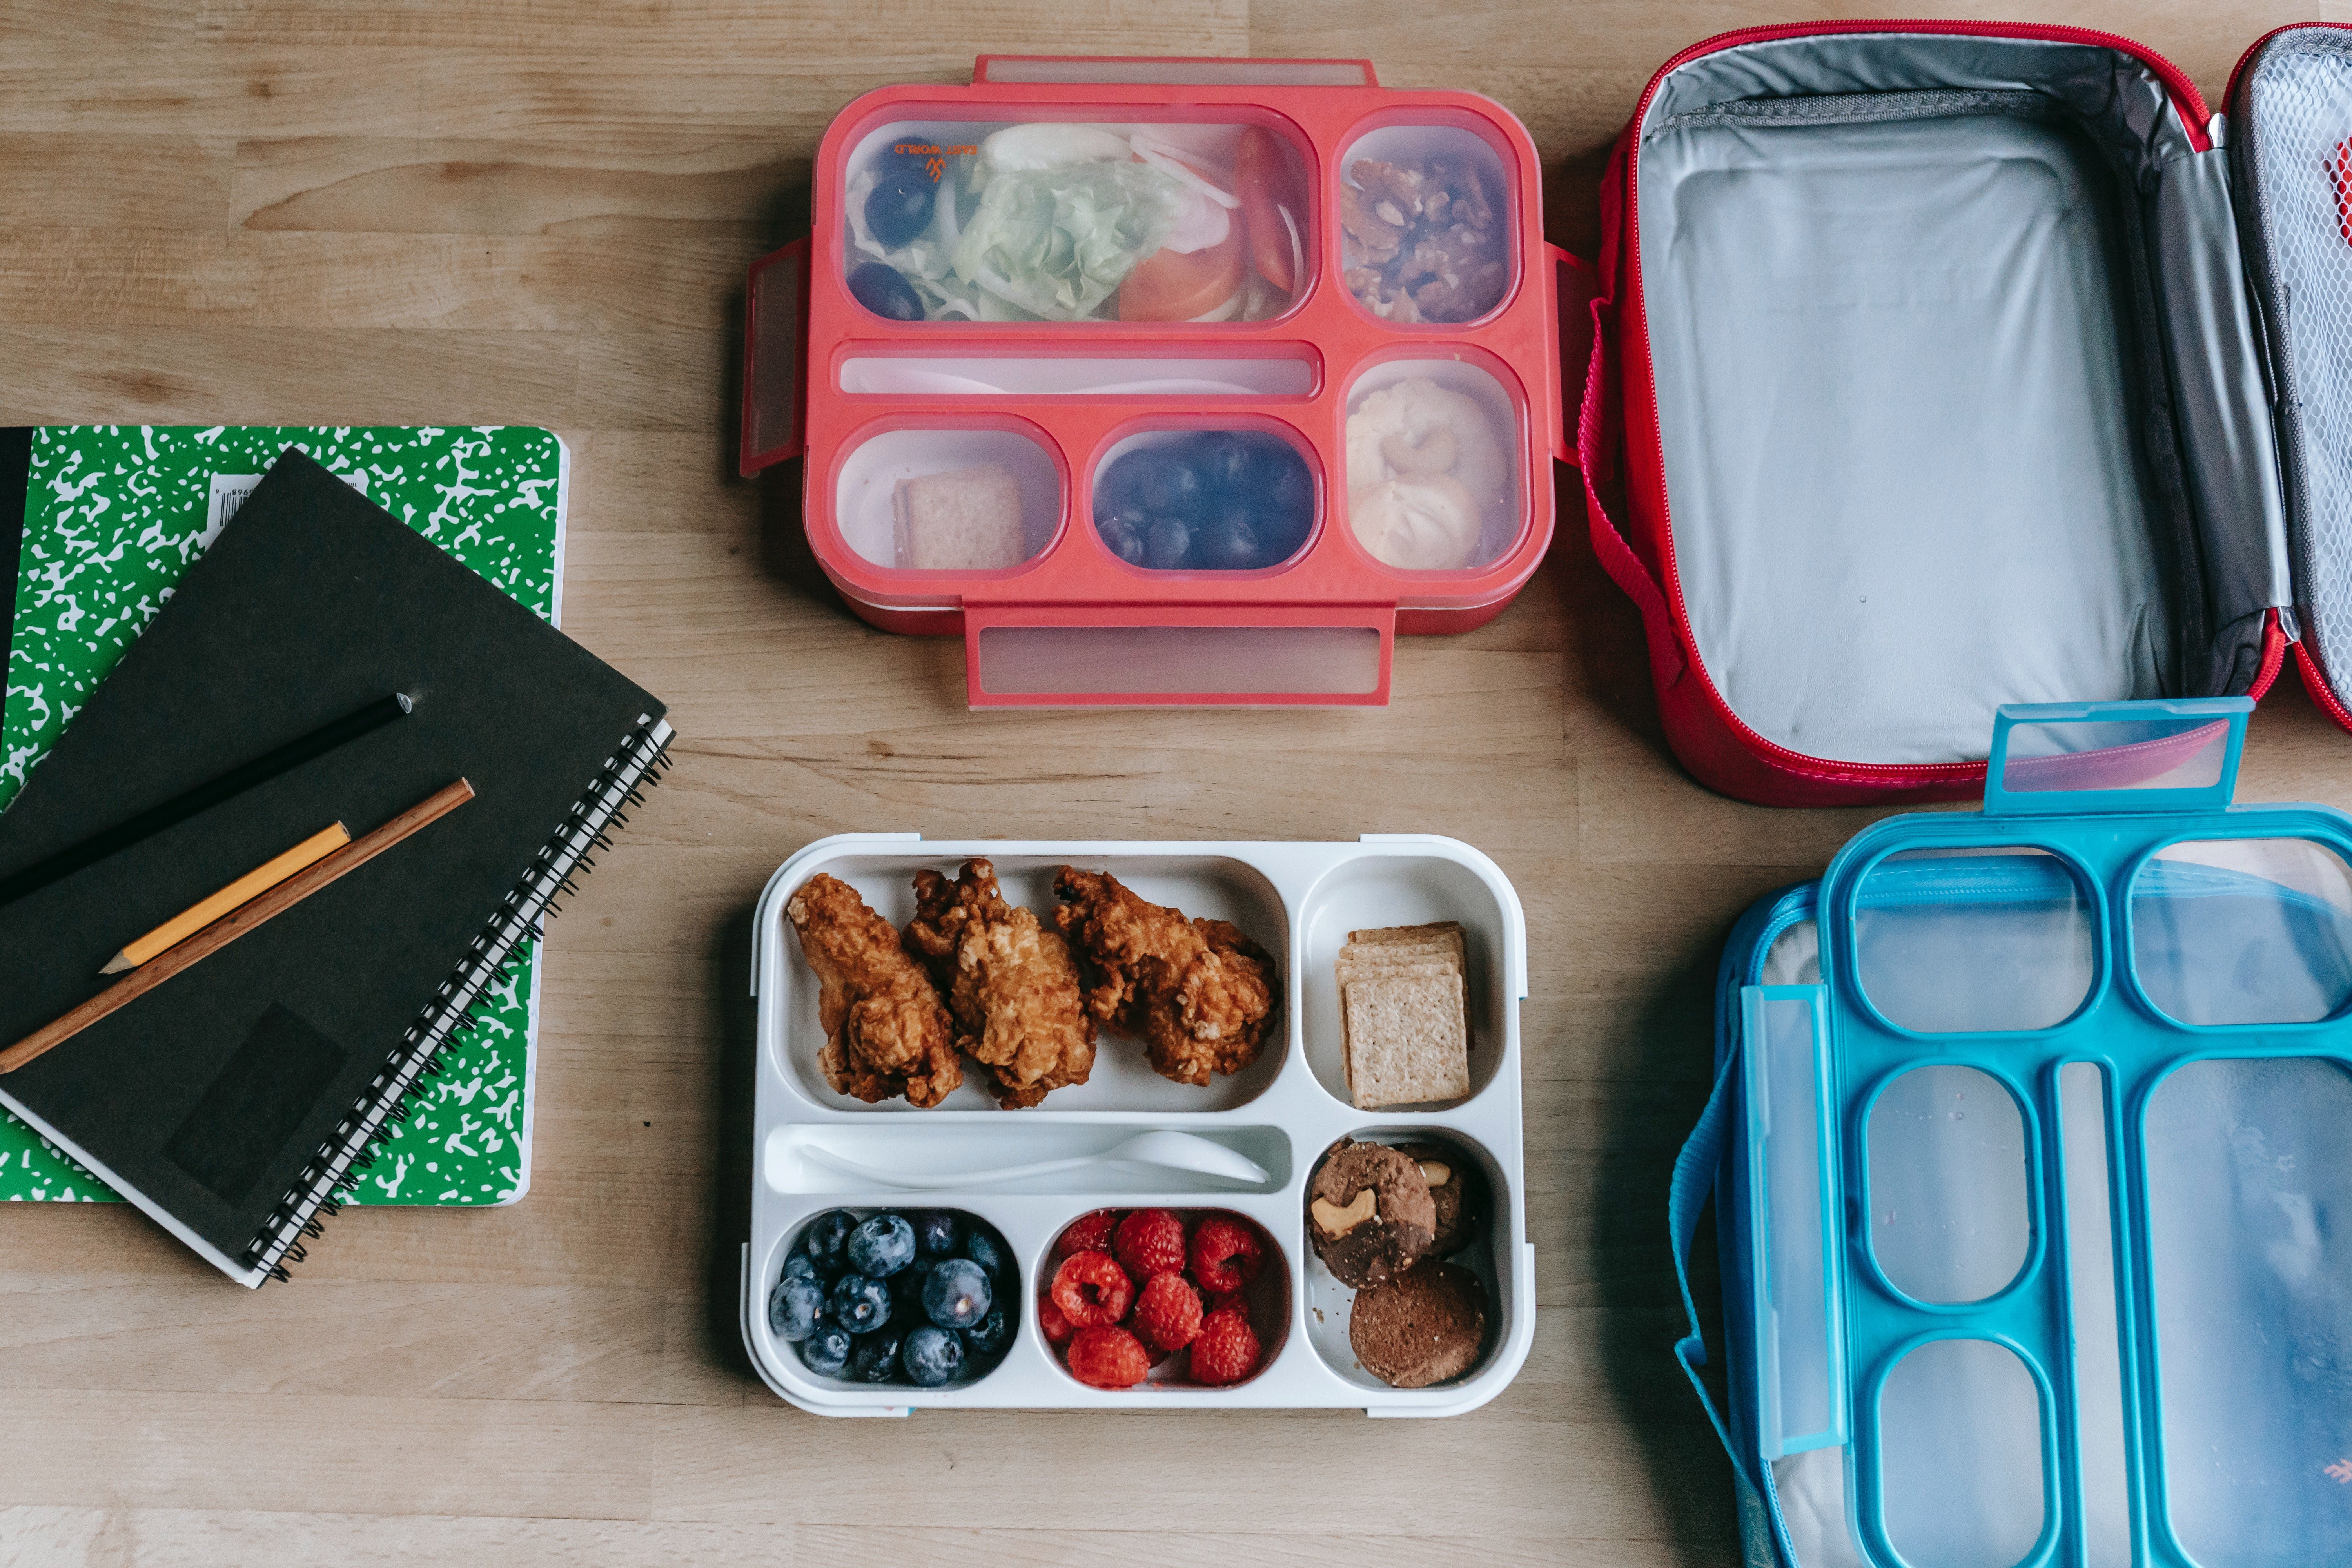 Mrs. Williams would prepare lunch for her son every day. | Source: Pexels